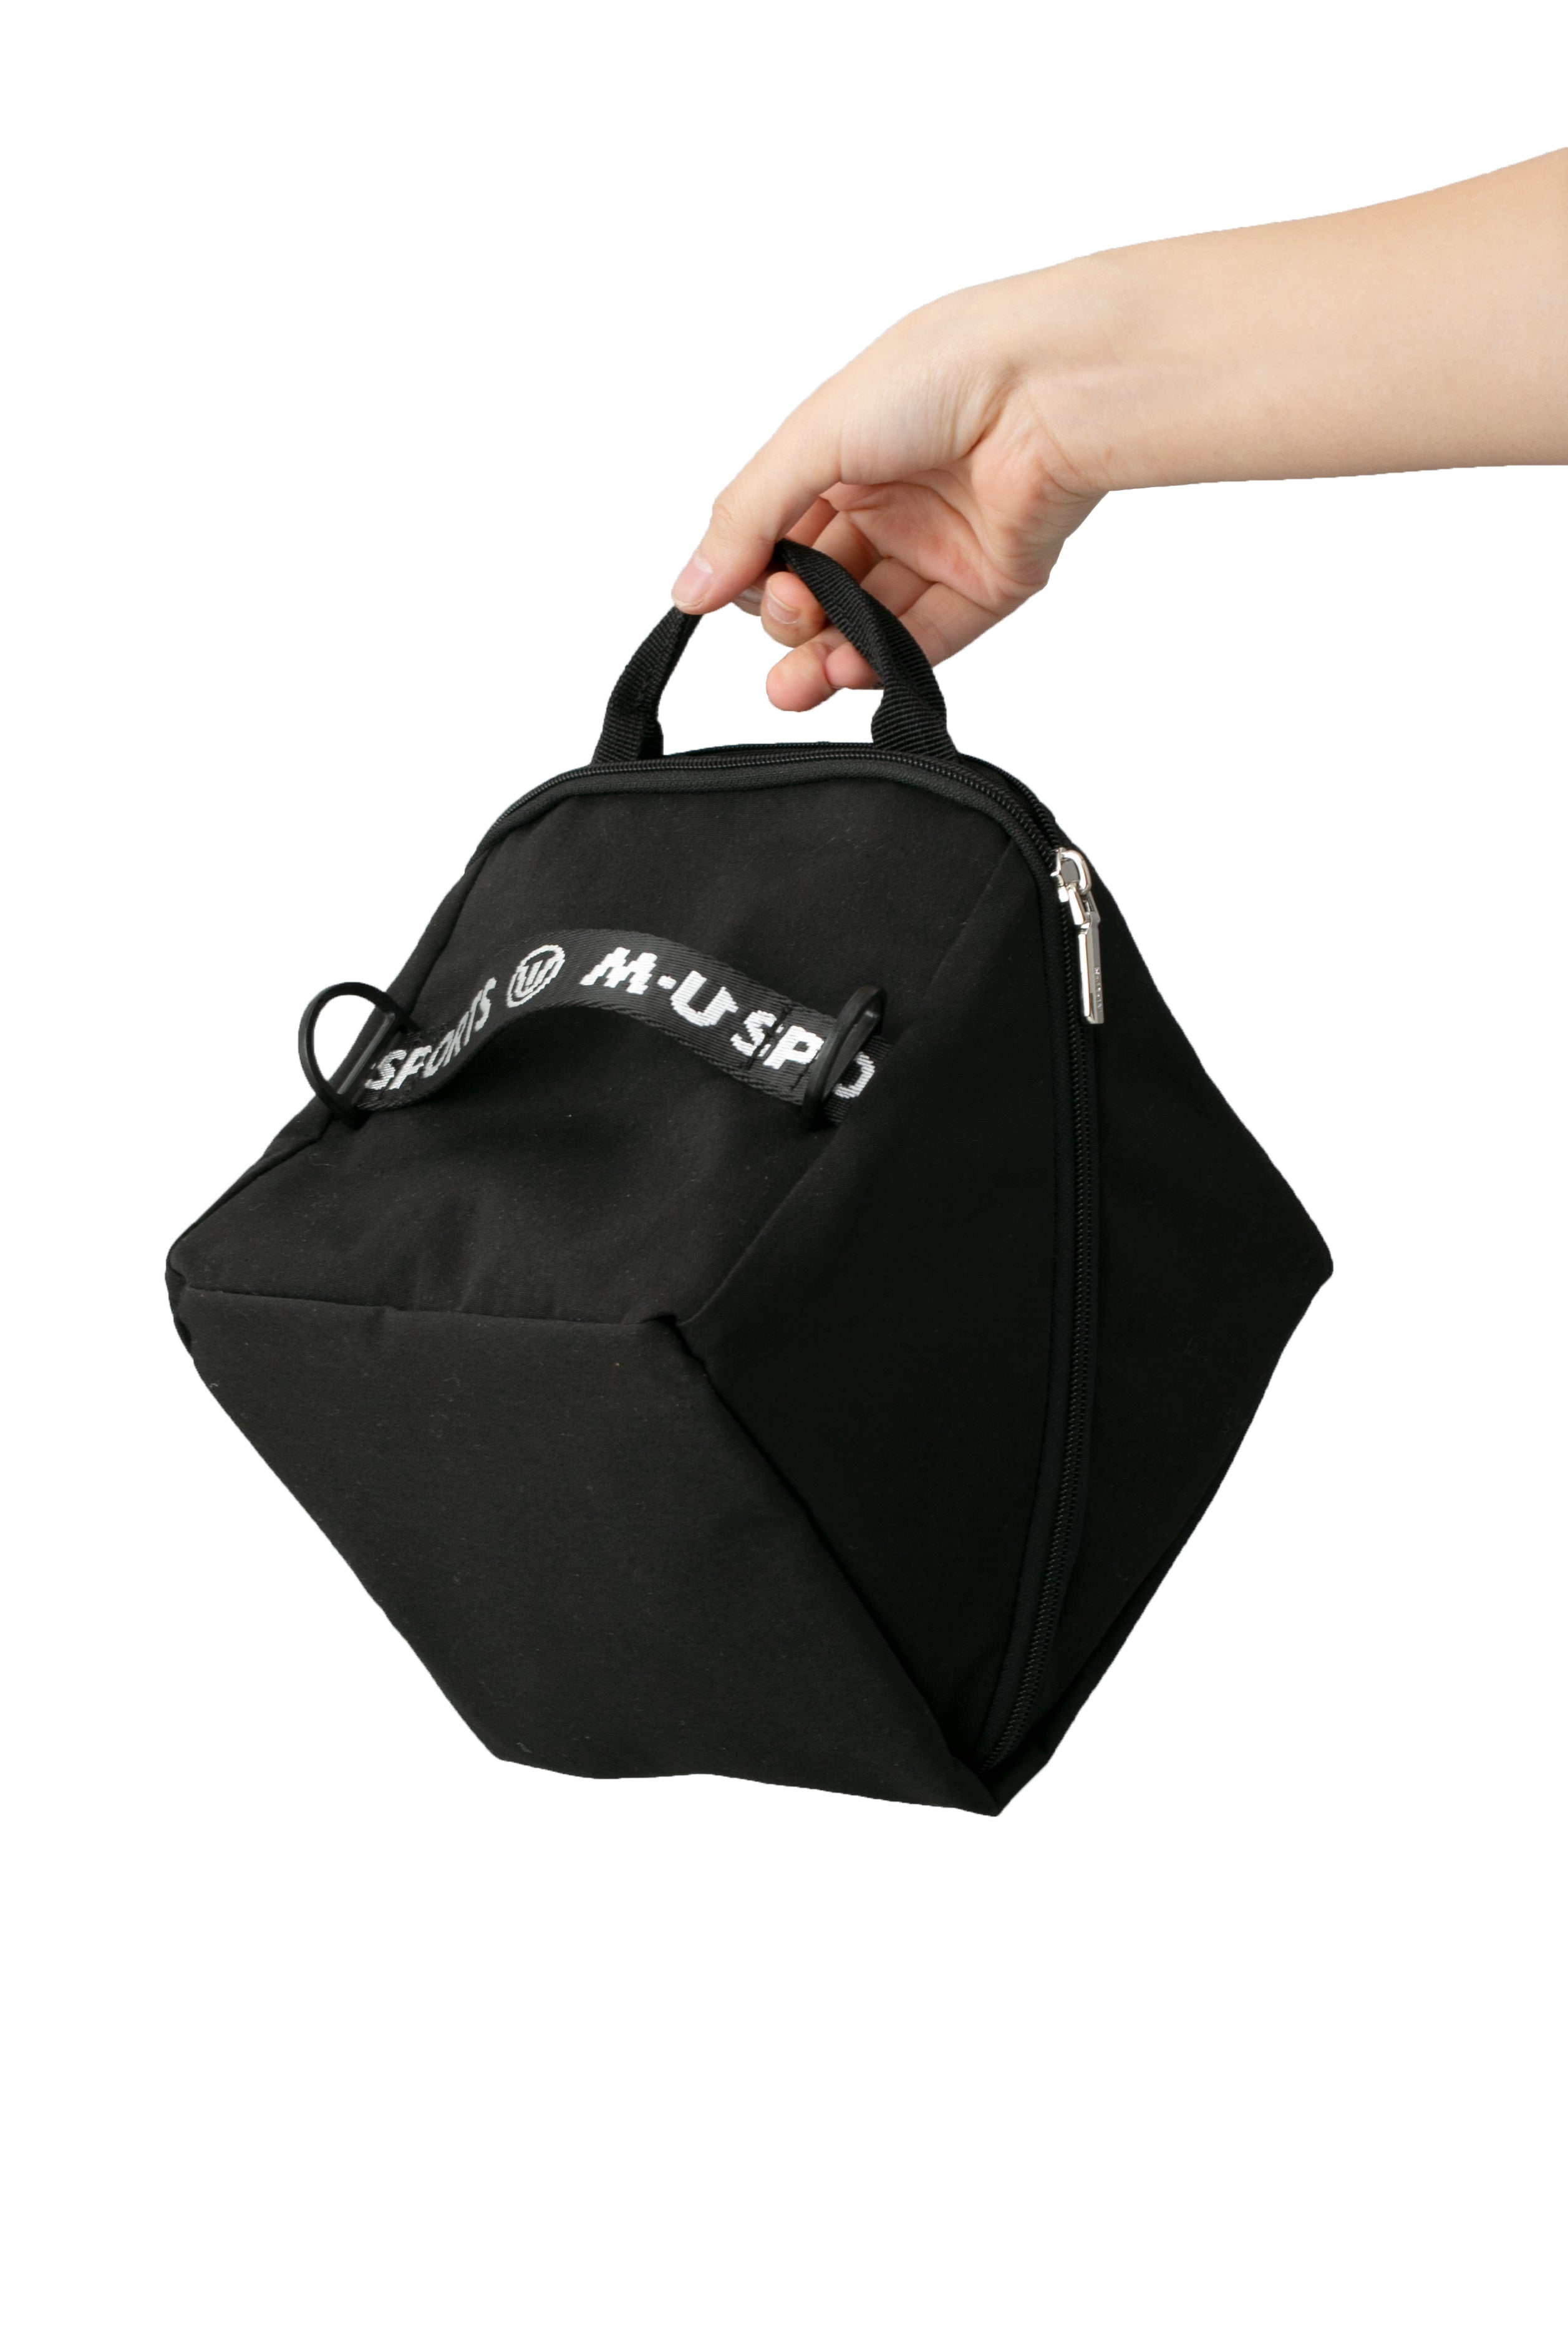 Cube bag with scrunchie motif cold storage function (703H1018)